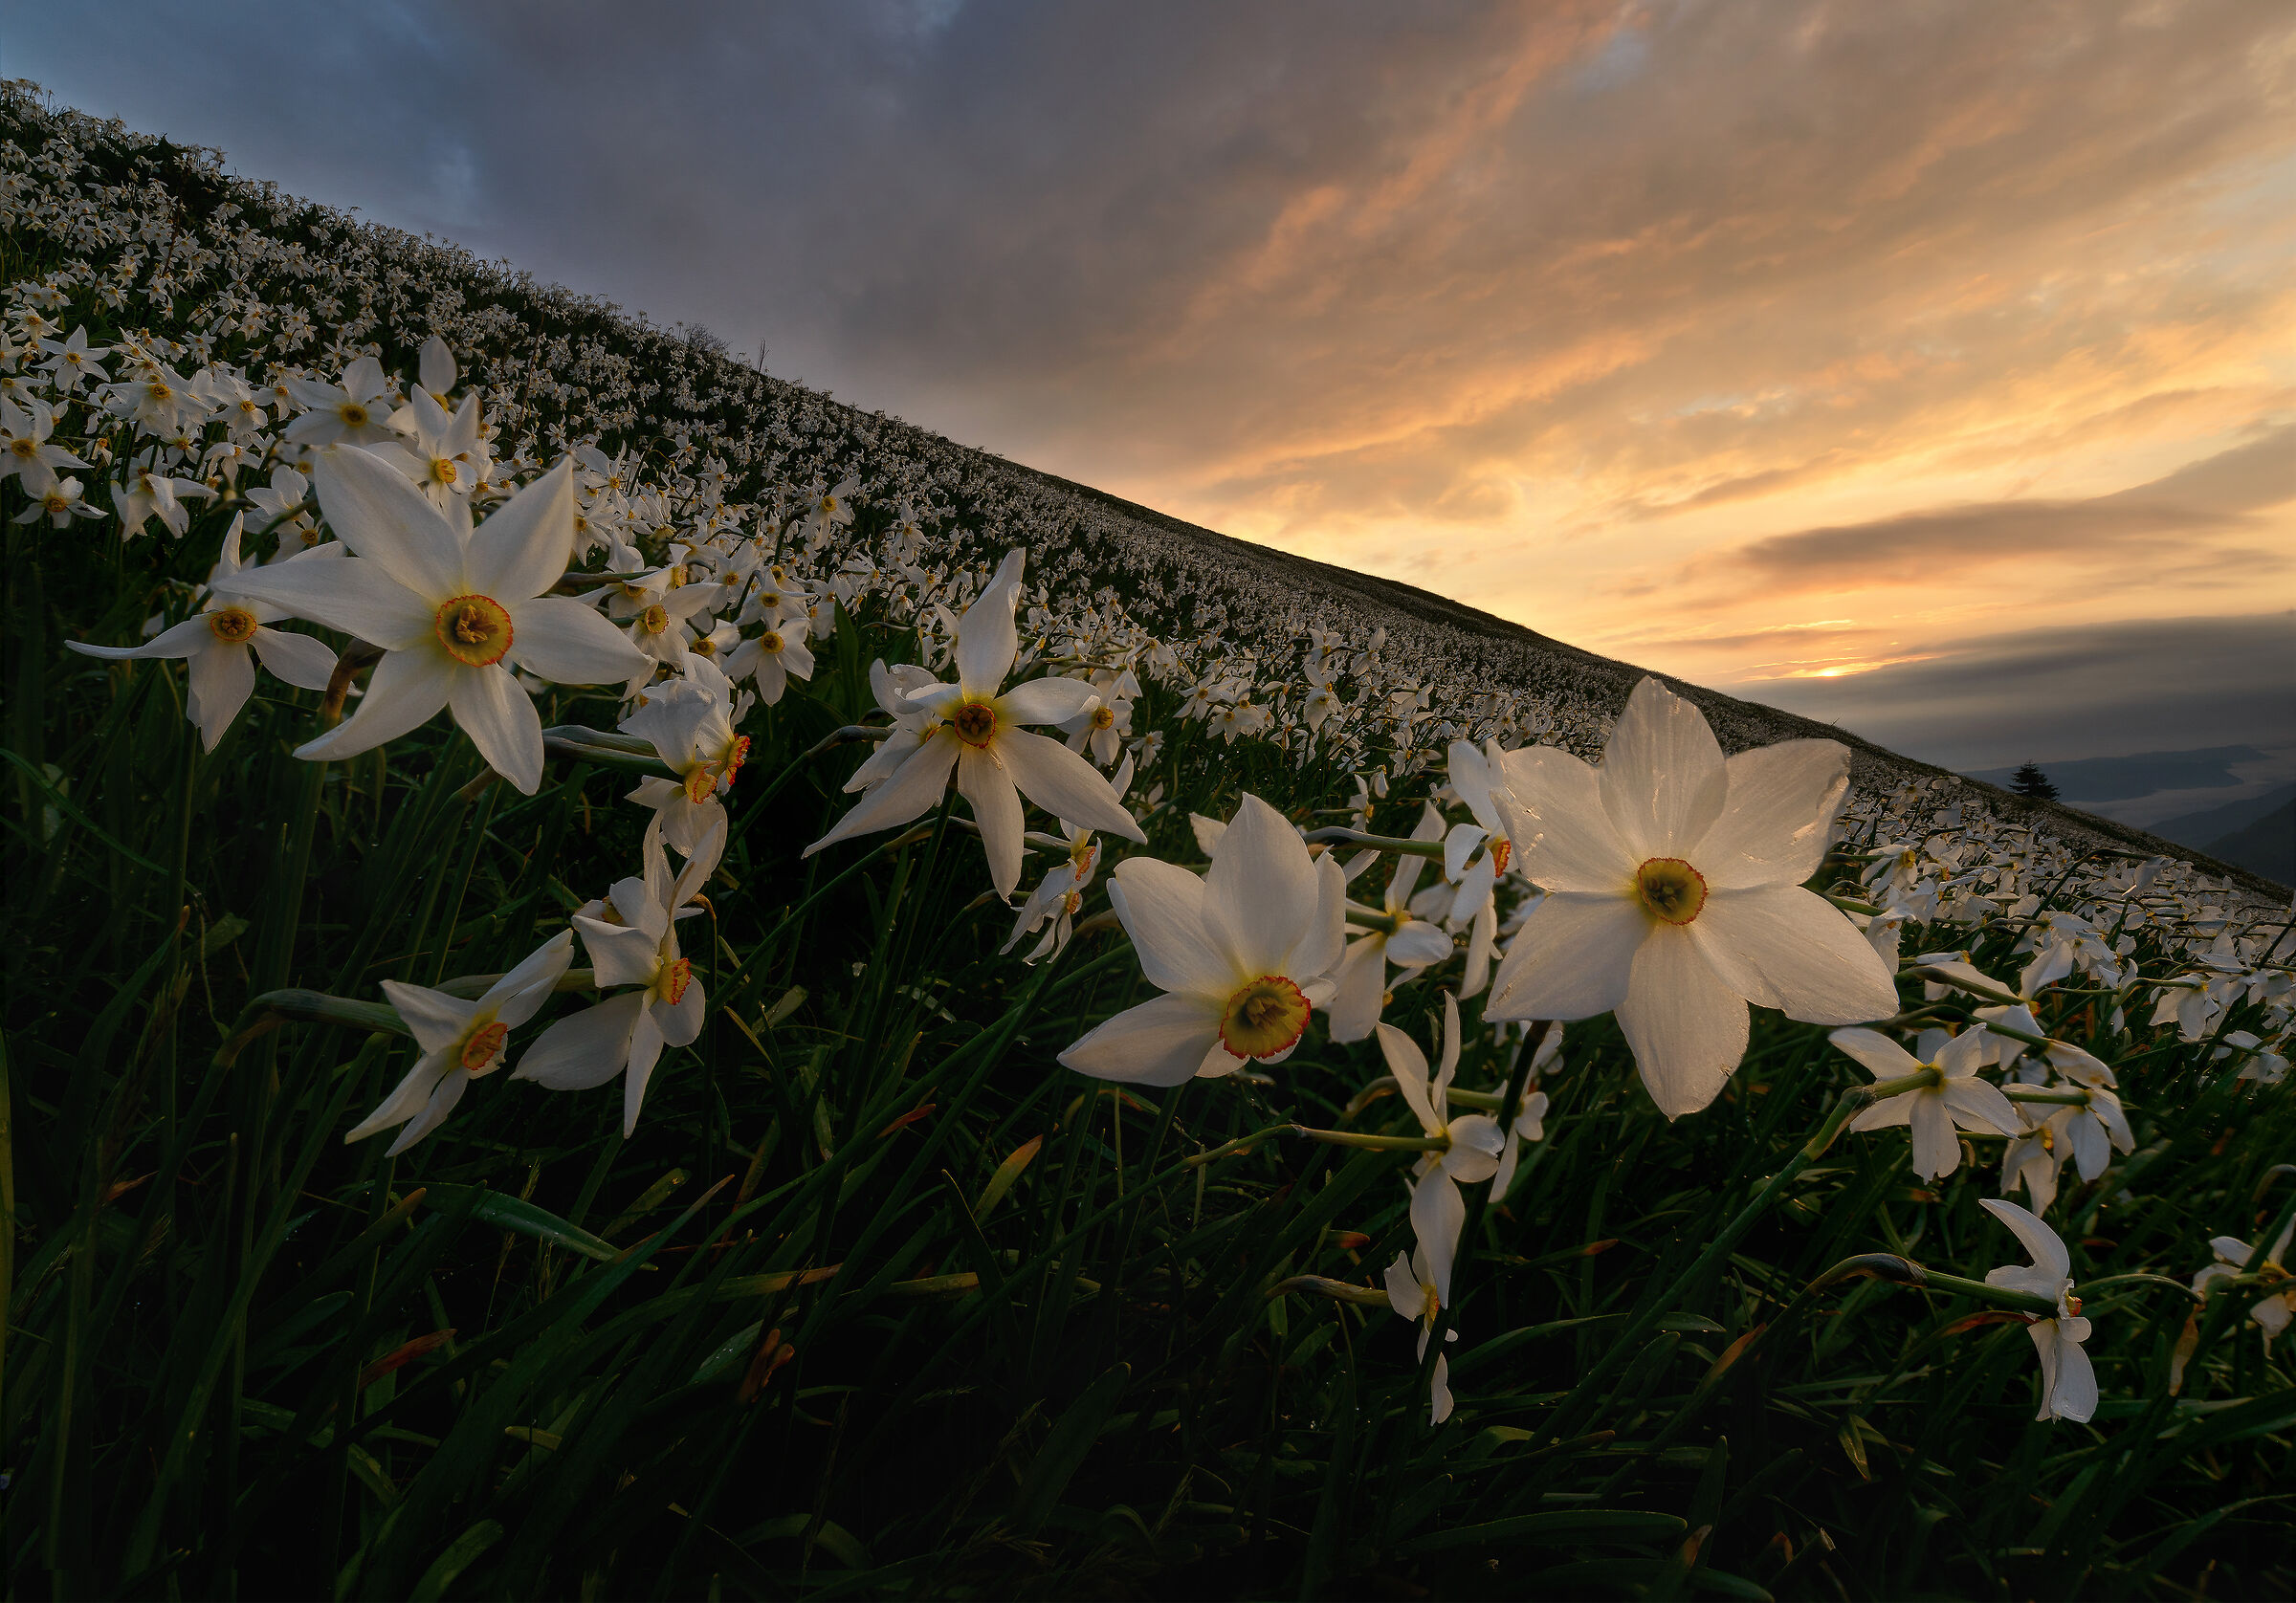 Daffodils in the hills...